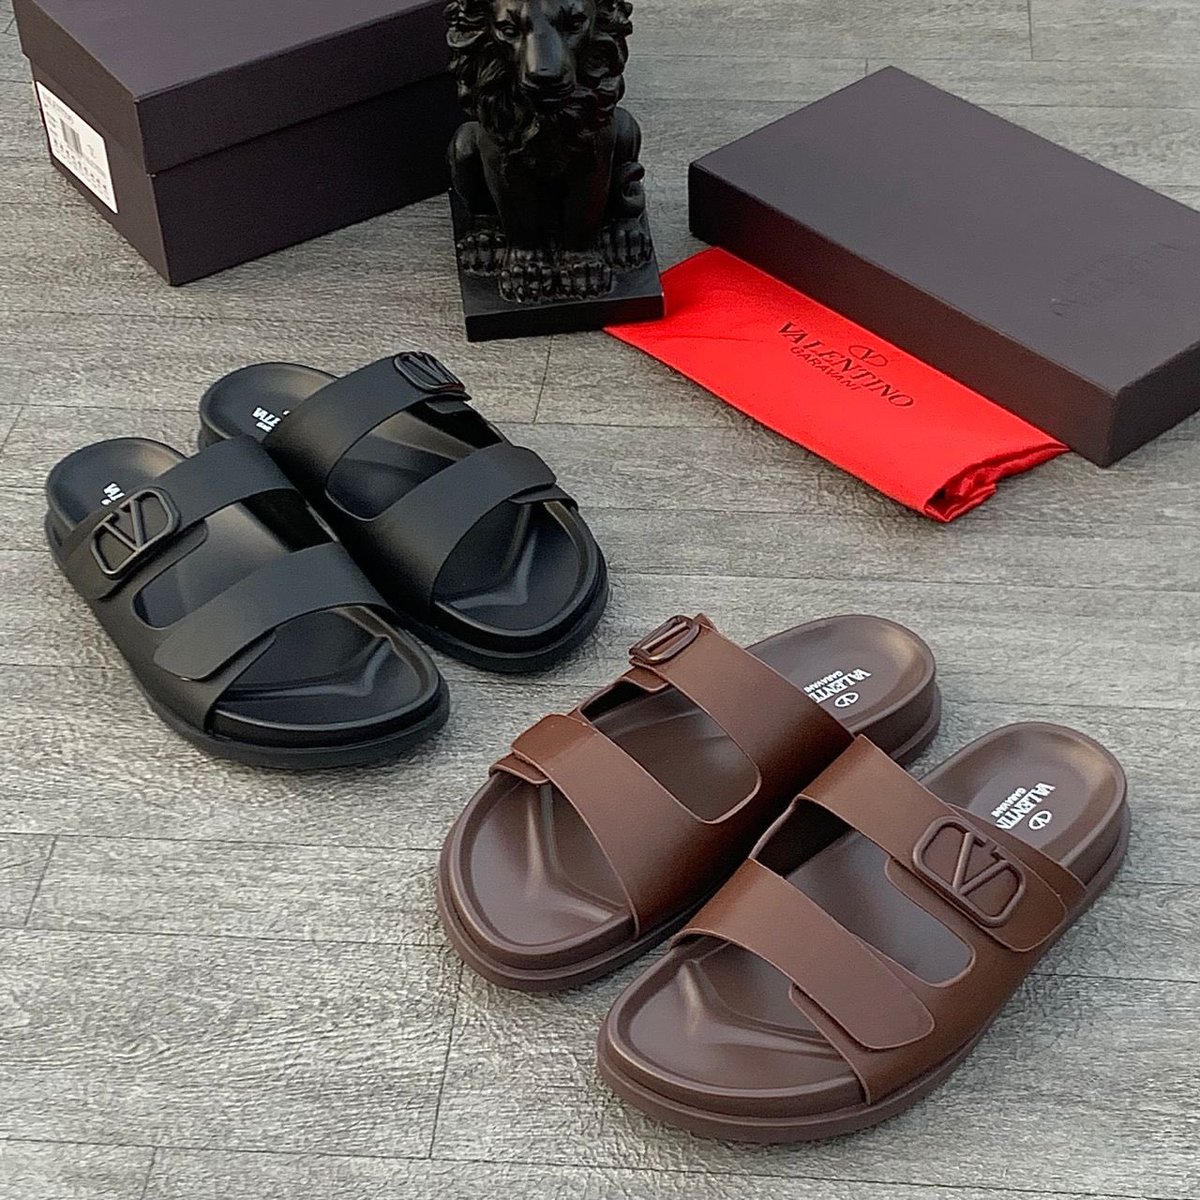 N43,000 40-46 Location: Lagos (delivery nationwide)